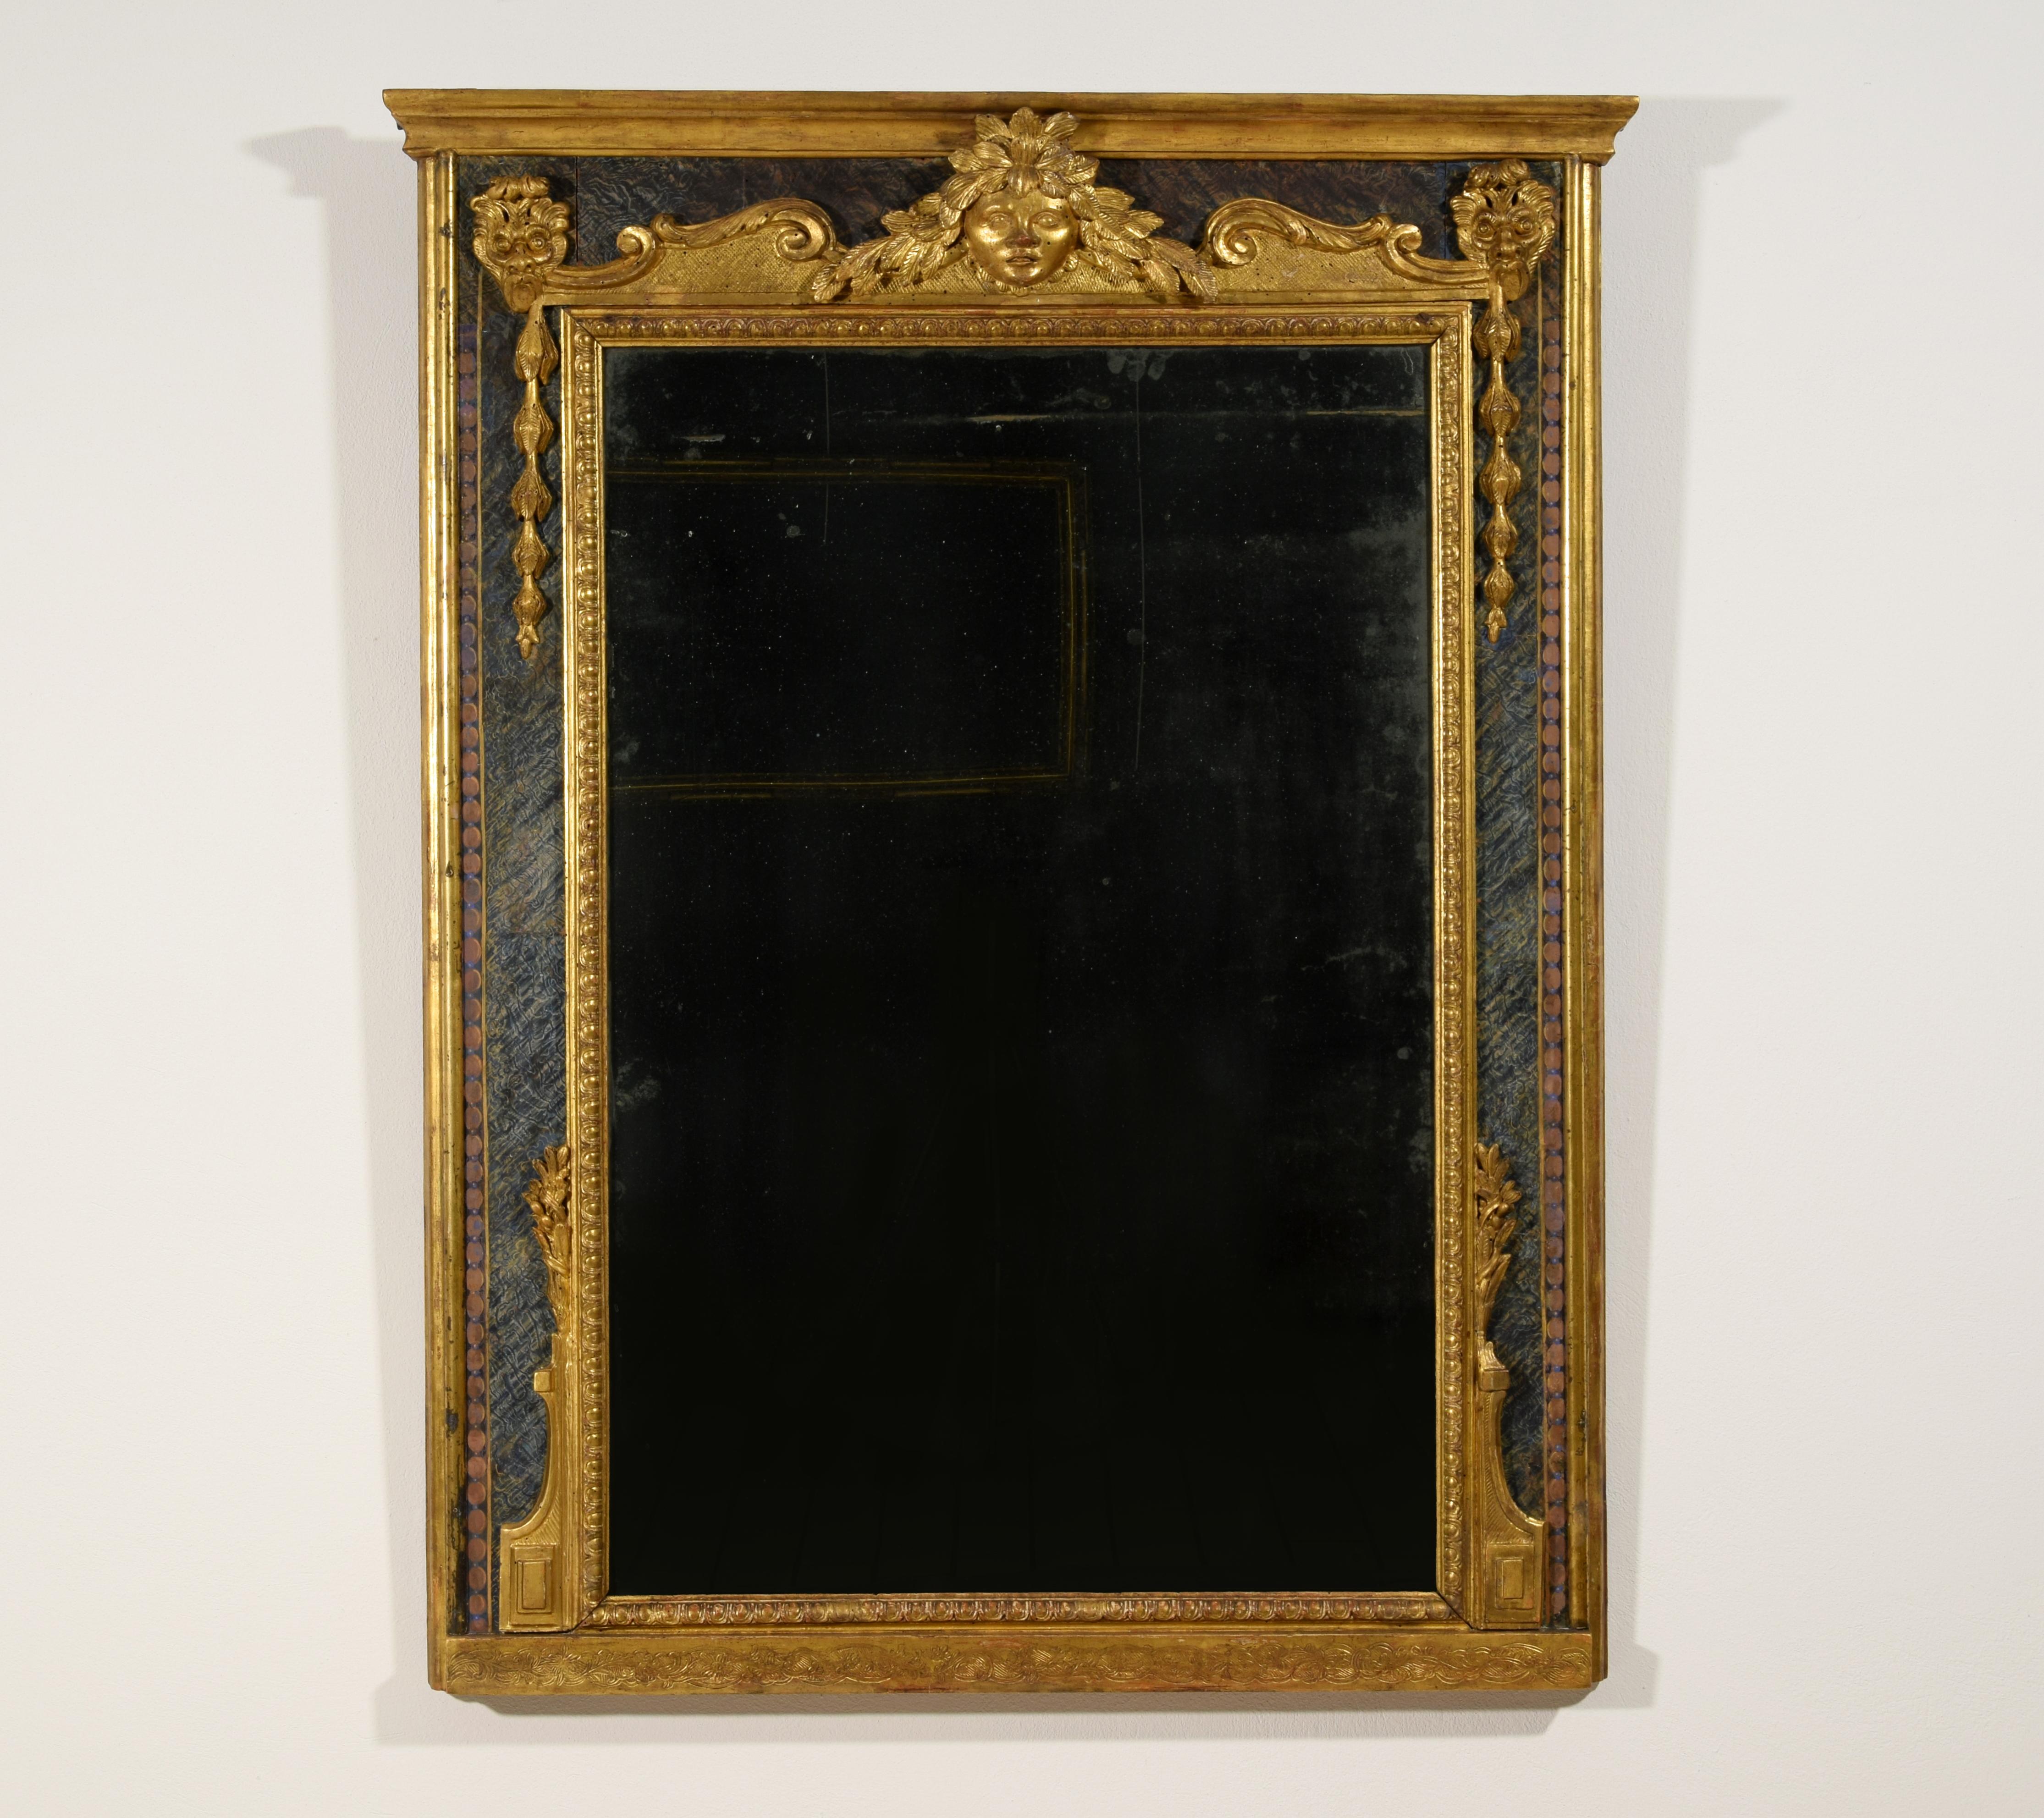 18th century, Italian Louis XIV carved giltwood mirror
The baroque mirror, made in Italy in the first half of the 18th century, has a rectangular frame in carved and gilded wood. The inner frame that surrounds the mirror is carved with palmette